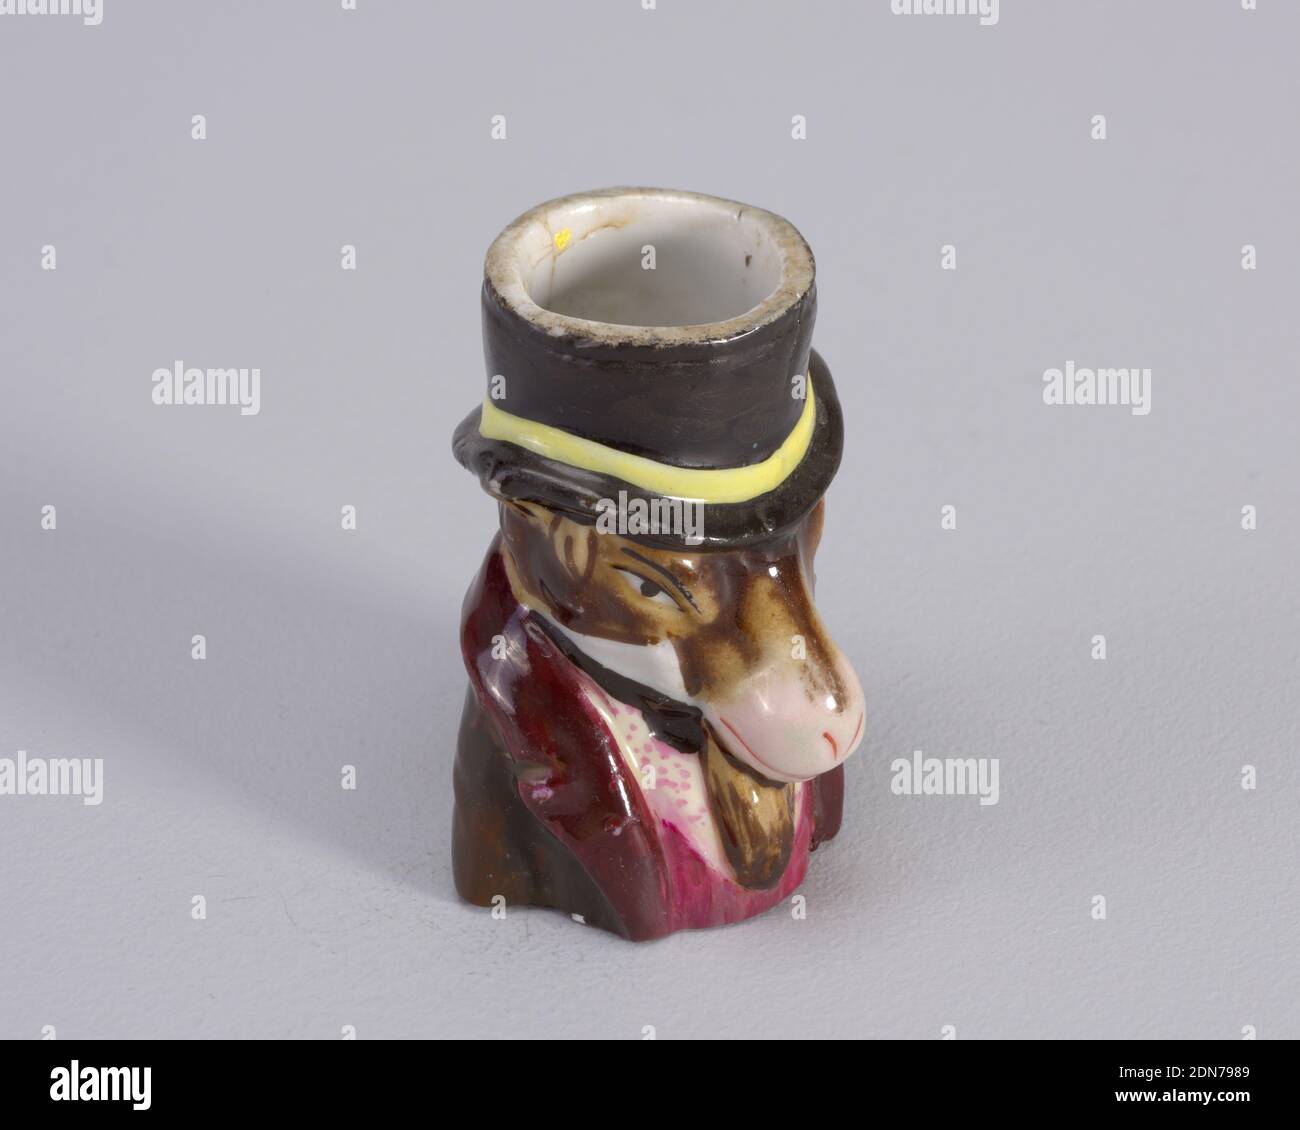 matchsafe, Porcelain, Figure of donkey wearing top hat with yellow band. Figure also wears maroon coat with magenta waistcoat and white shirt with magenta dots., probably England, late 19th century, containers, Decorative Arts, matchsafe Stock Photo